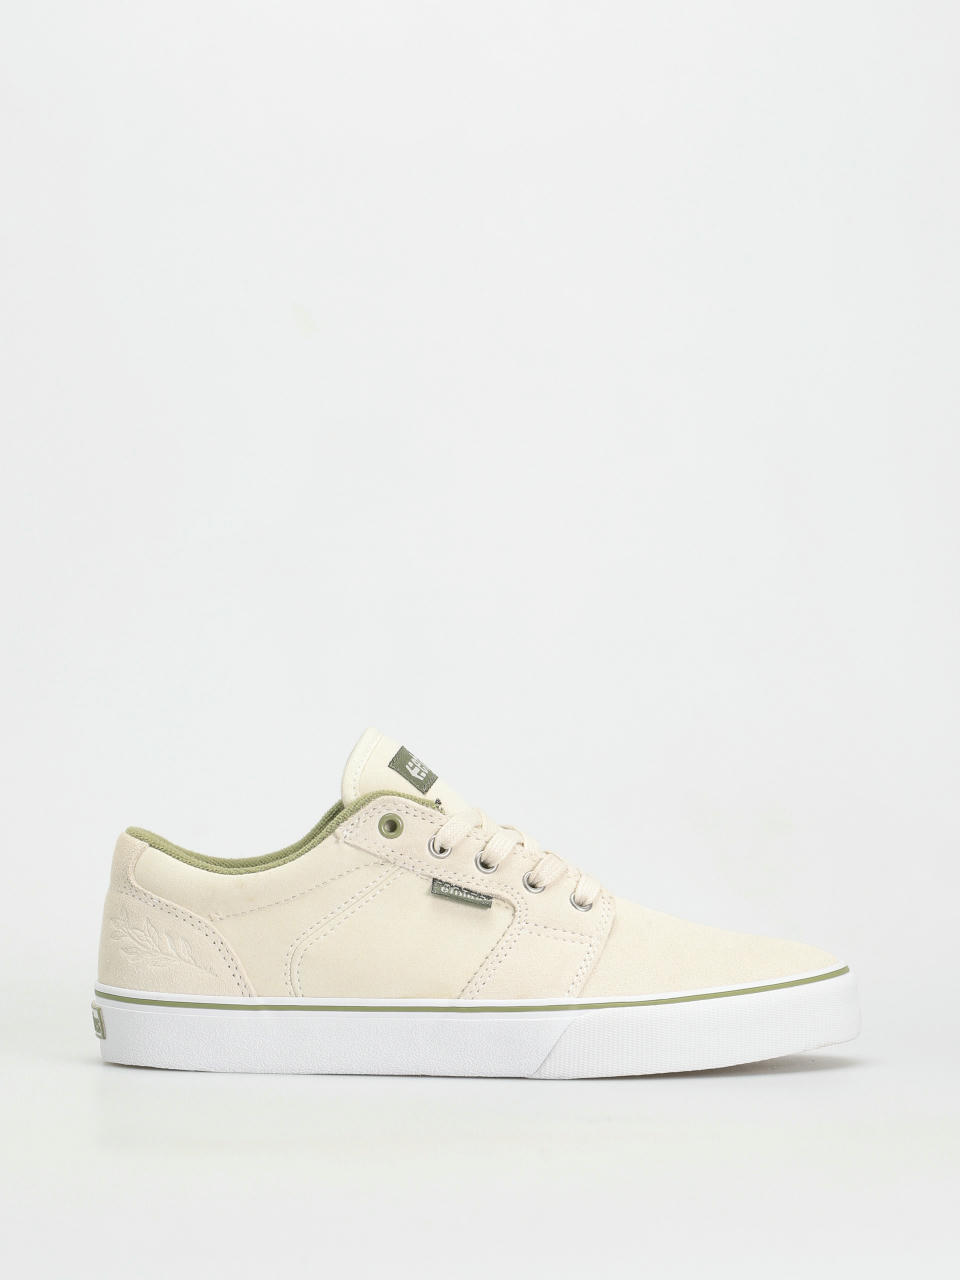 Etnies Barge Ls Shoes (white/green)